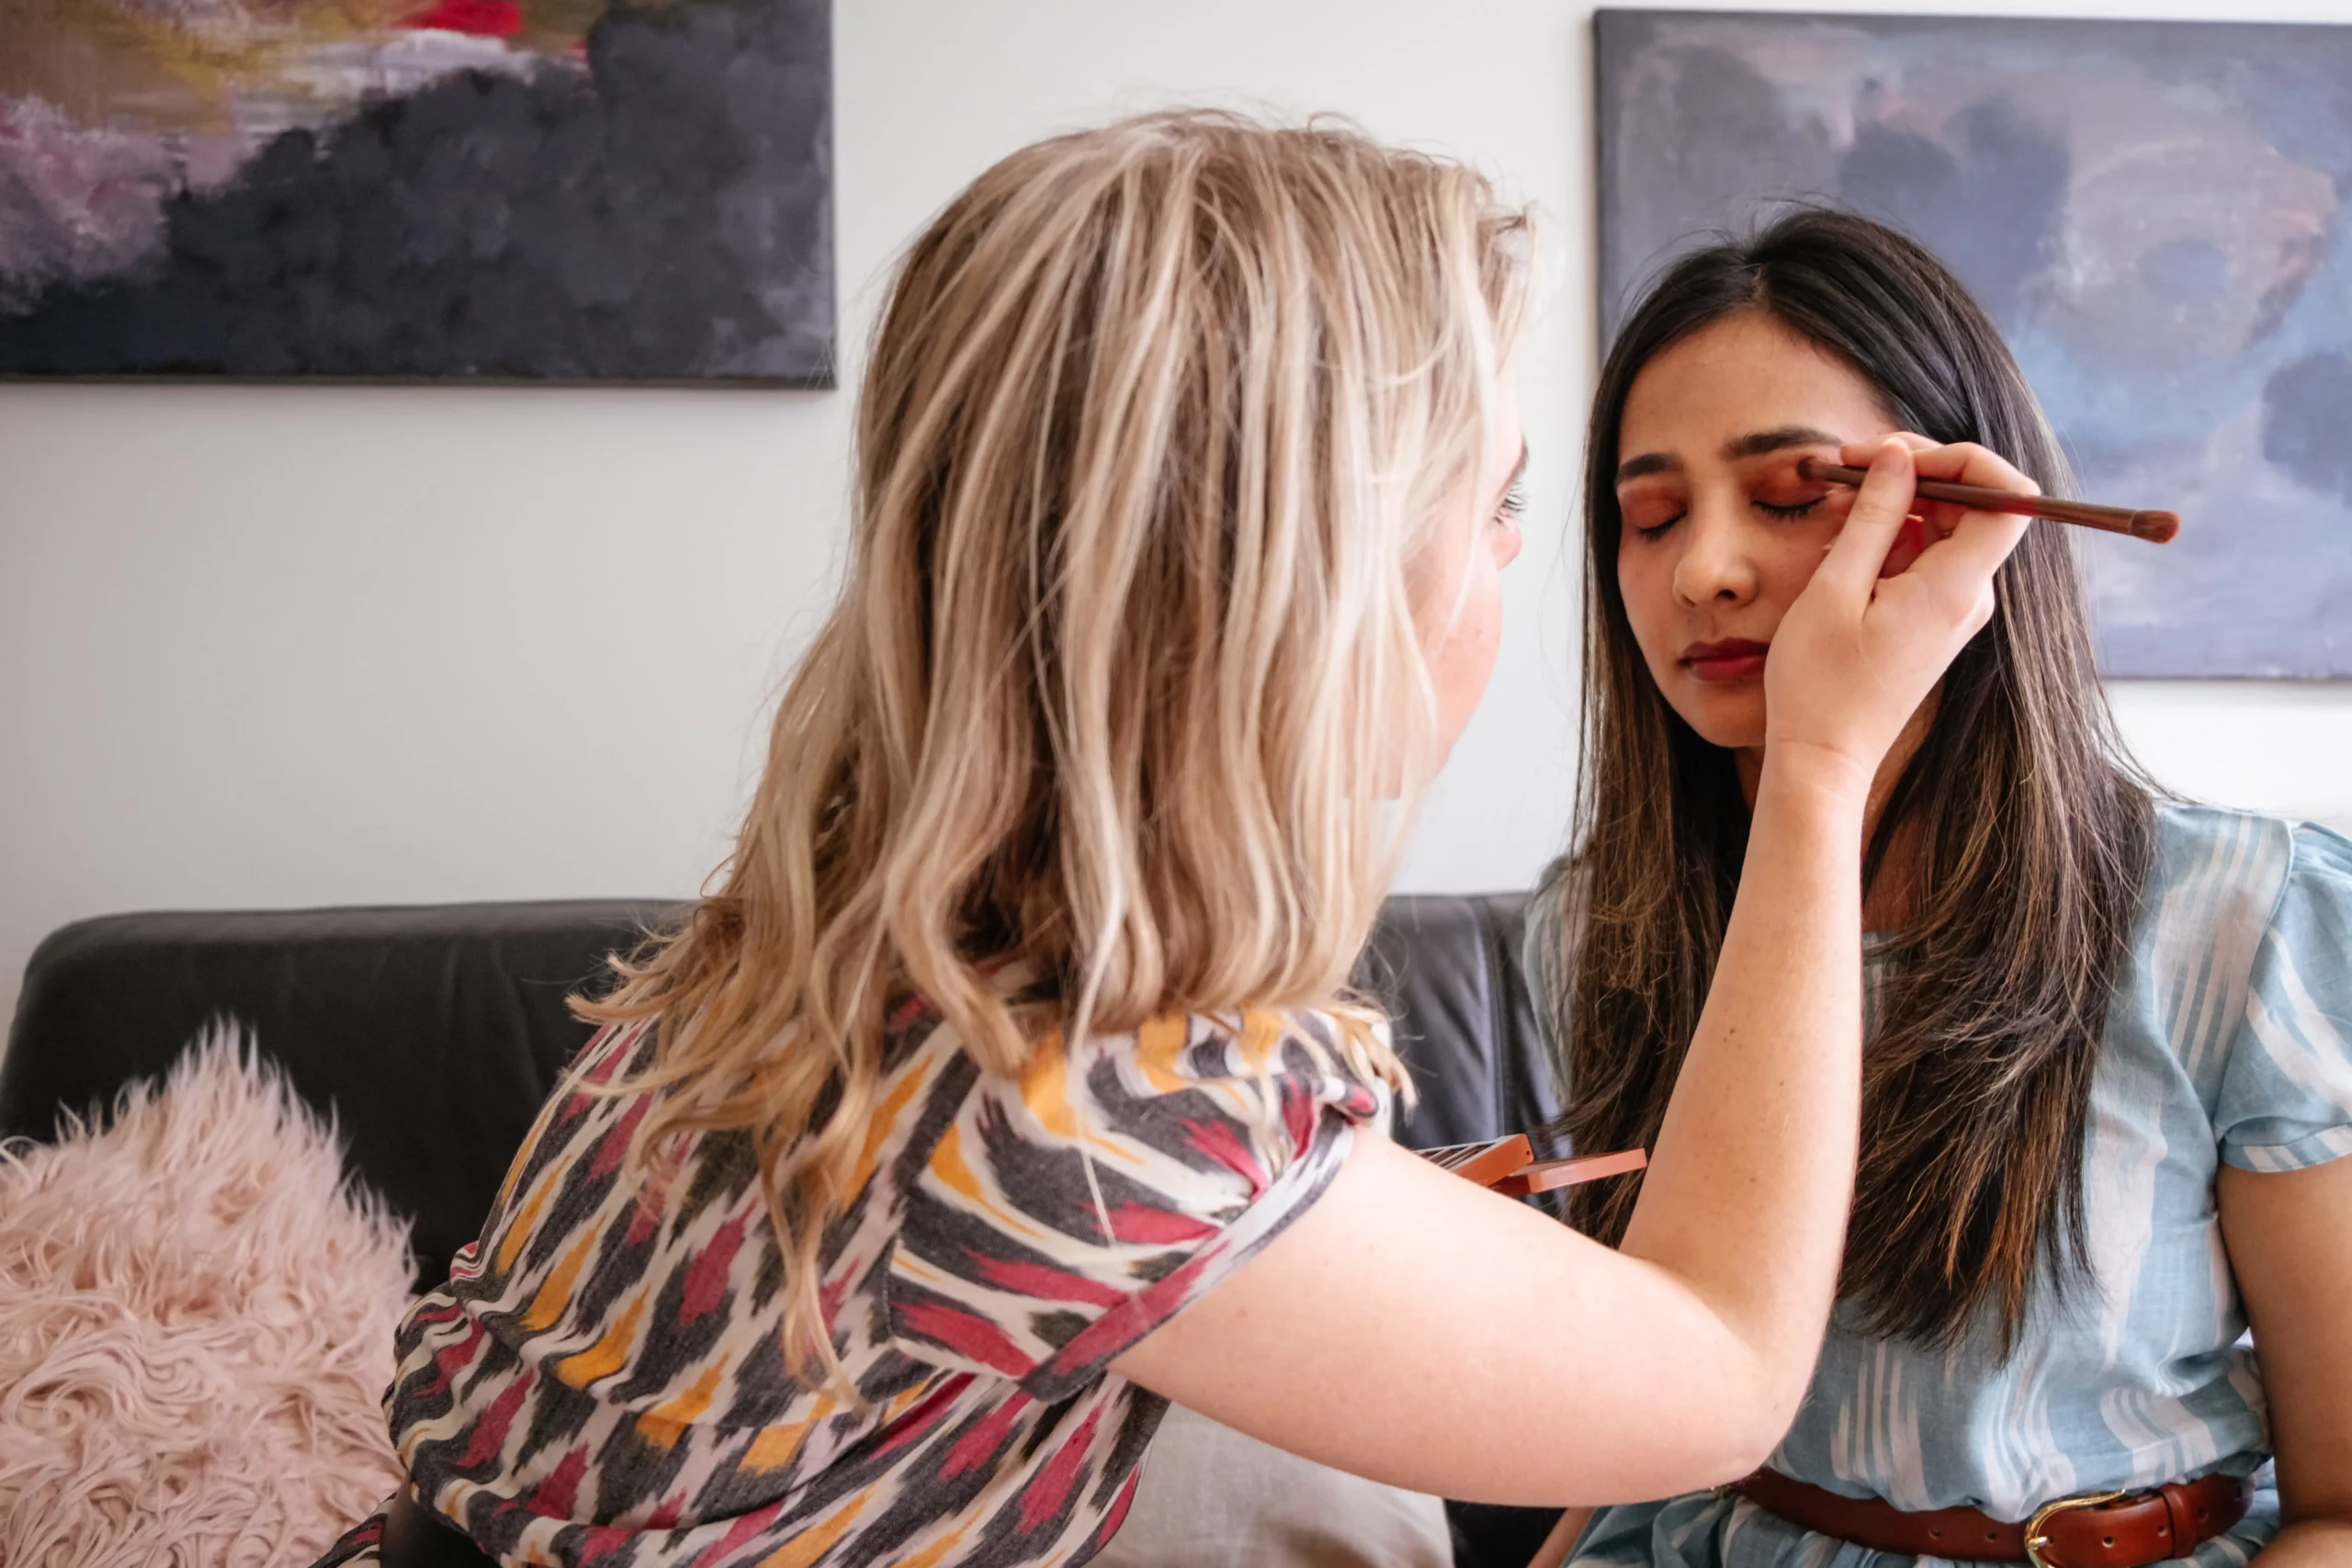 make up artist applying make up on other woman